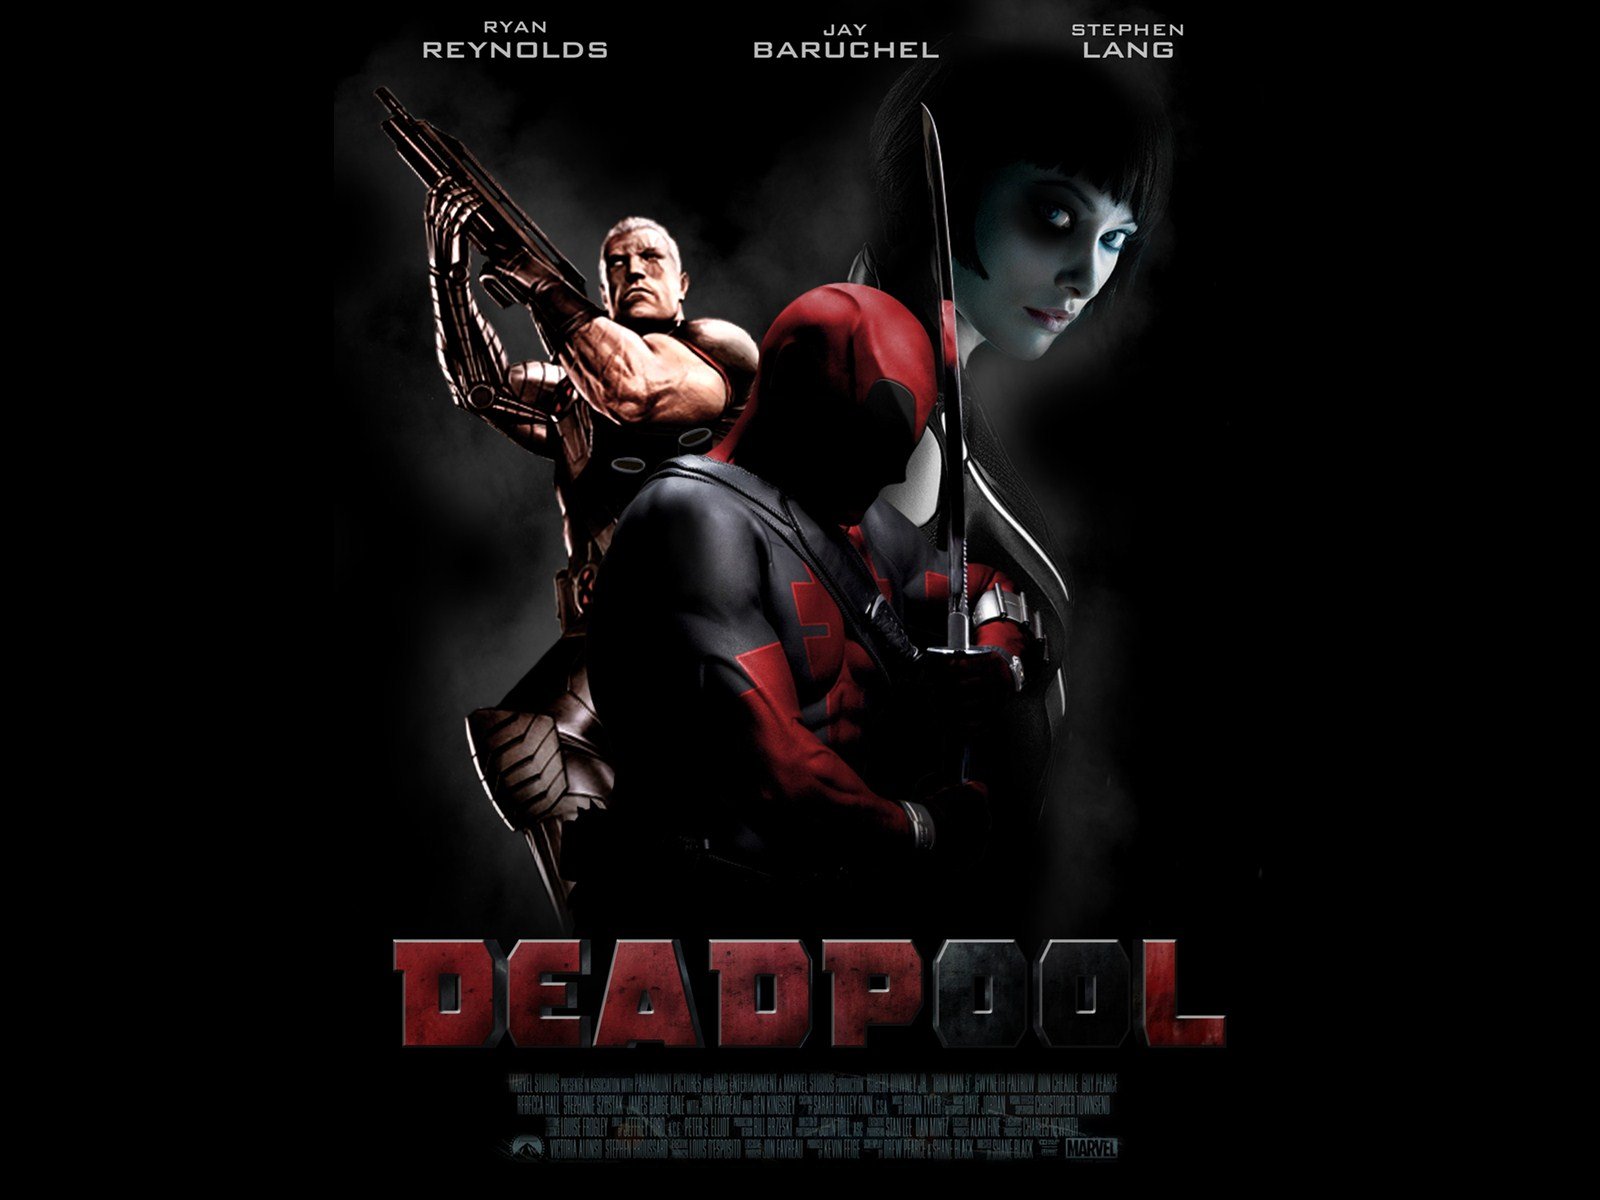  By Stephen Comments Off on Deadpool Movie Wallpaper